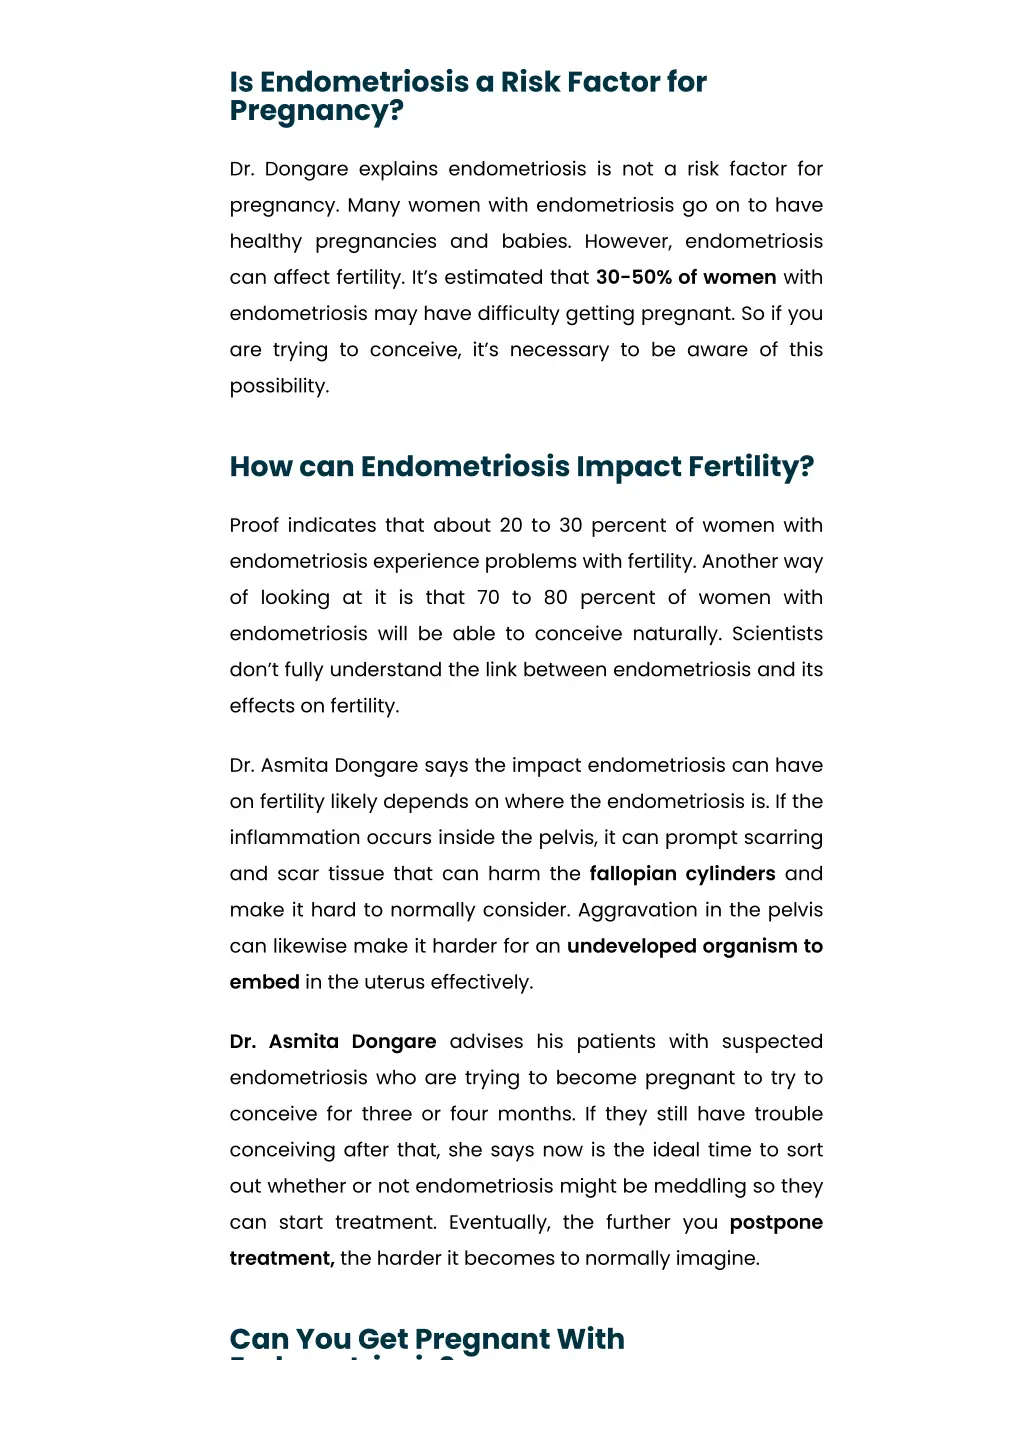 is endometriosis a risk factor for pregnancy